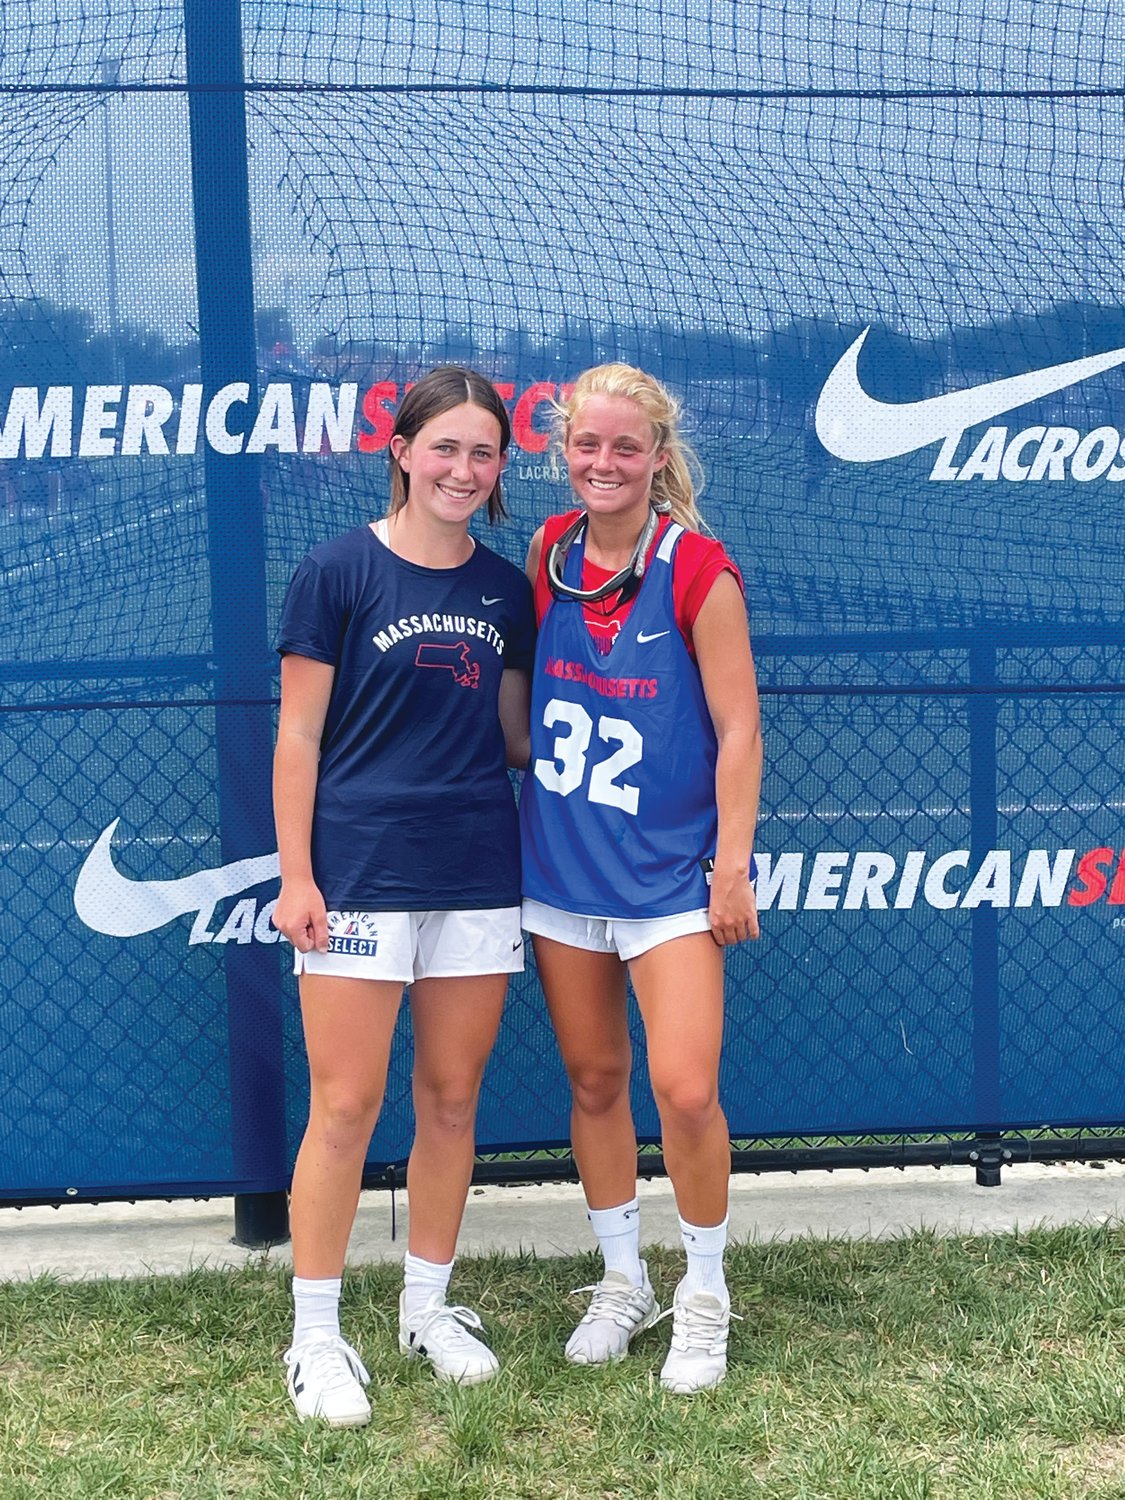 Hannah Evens, left, and Bailey Lower competed against the top players in the country at the American Select Lacrosse tournament in Delaware last weekend.